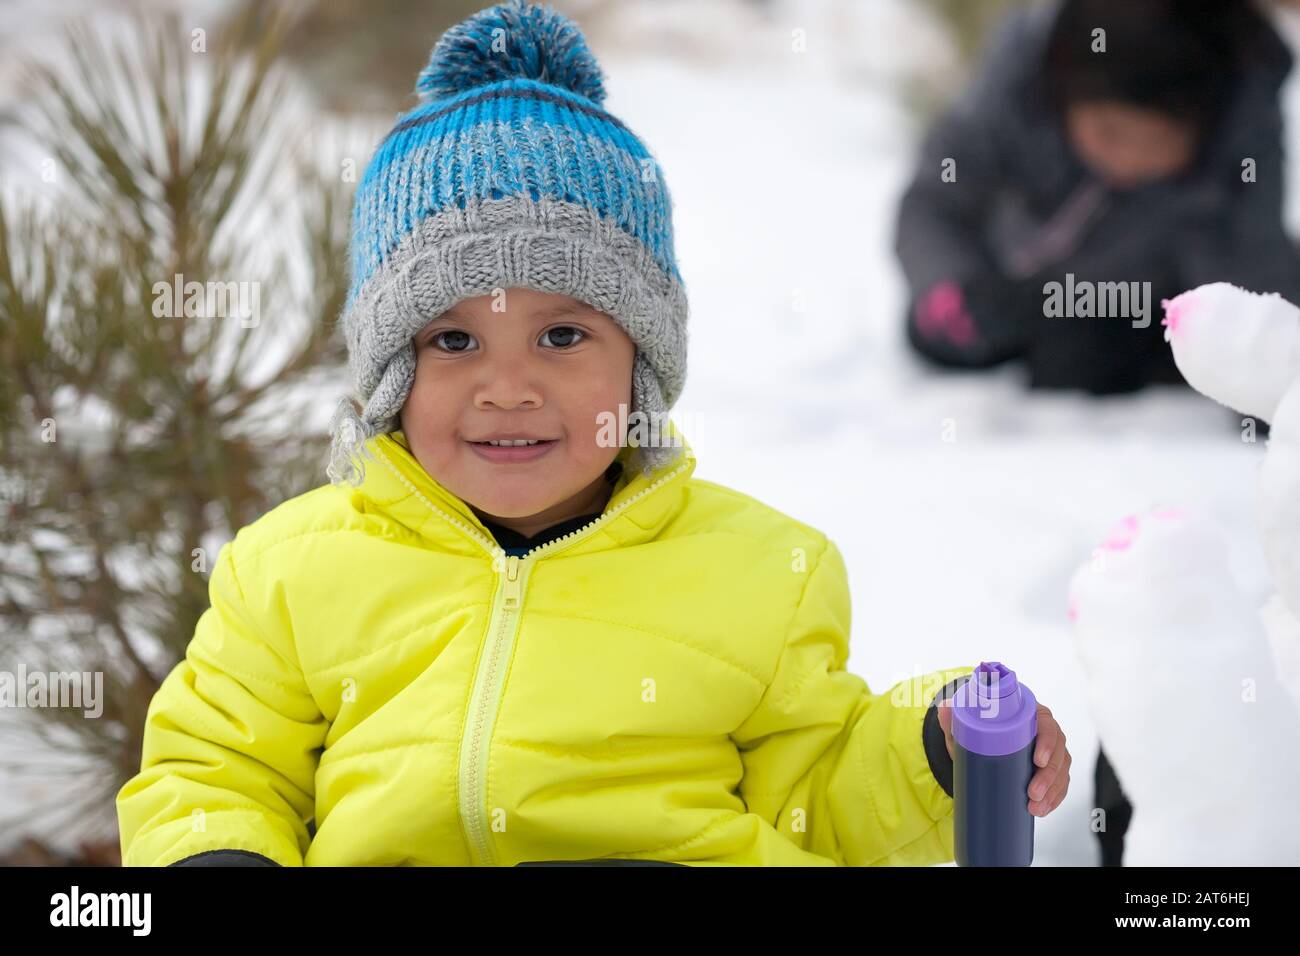 A little boy with a cute smile that is in a snow covered mountain, wearing colorful winter clothes and painting a snowman with paints. Stock Photo